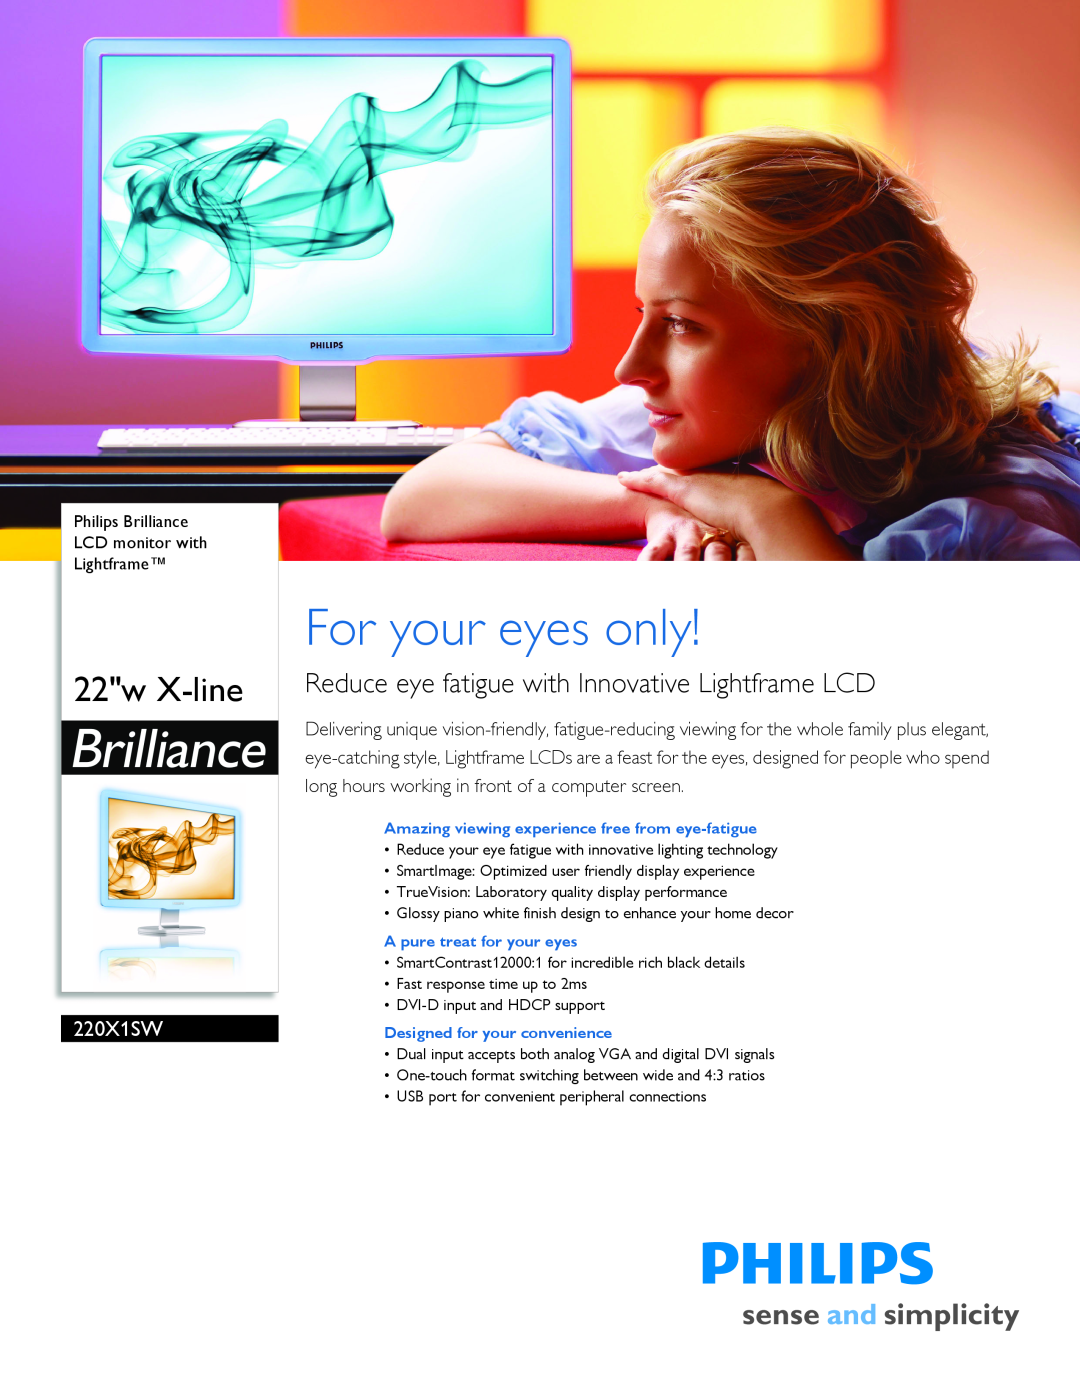 Philips 220X1SW manual Philips Brilliance LCD monitor with Lightframe, Amazing viewing experience free from eye-fatigue 